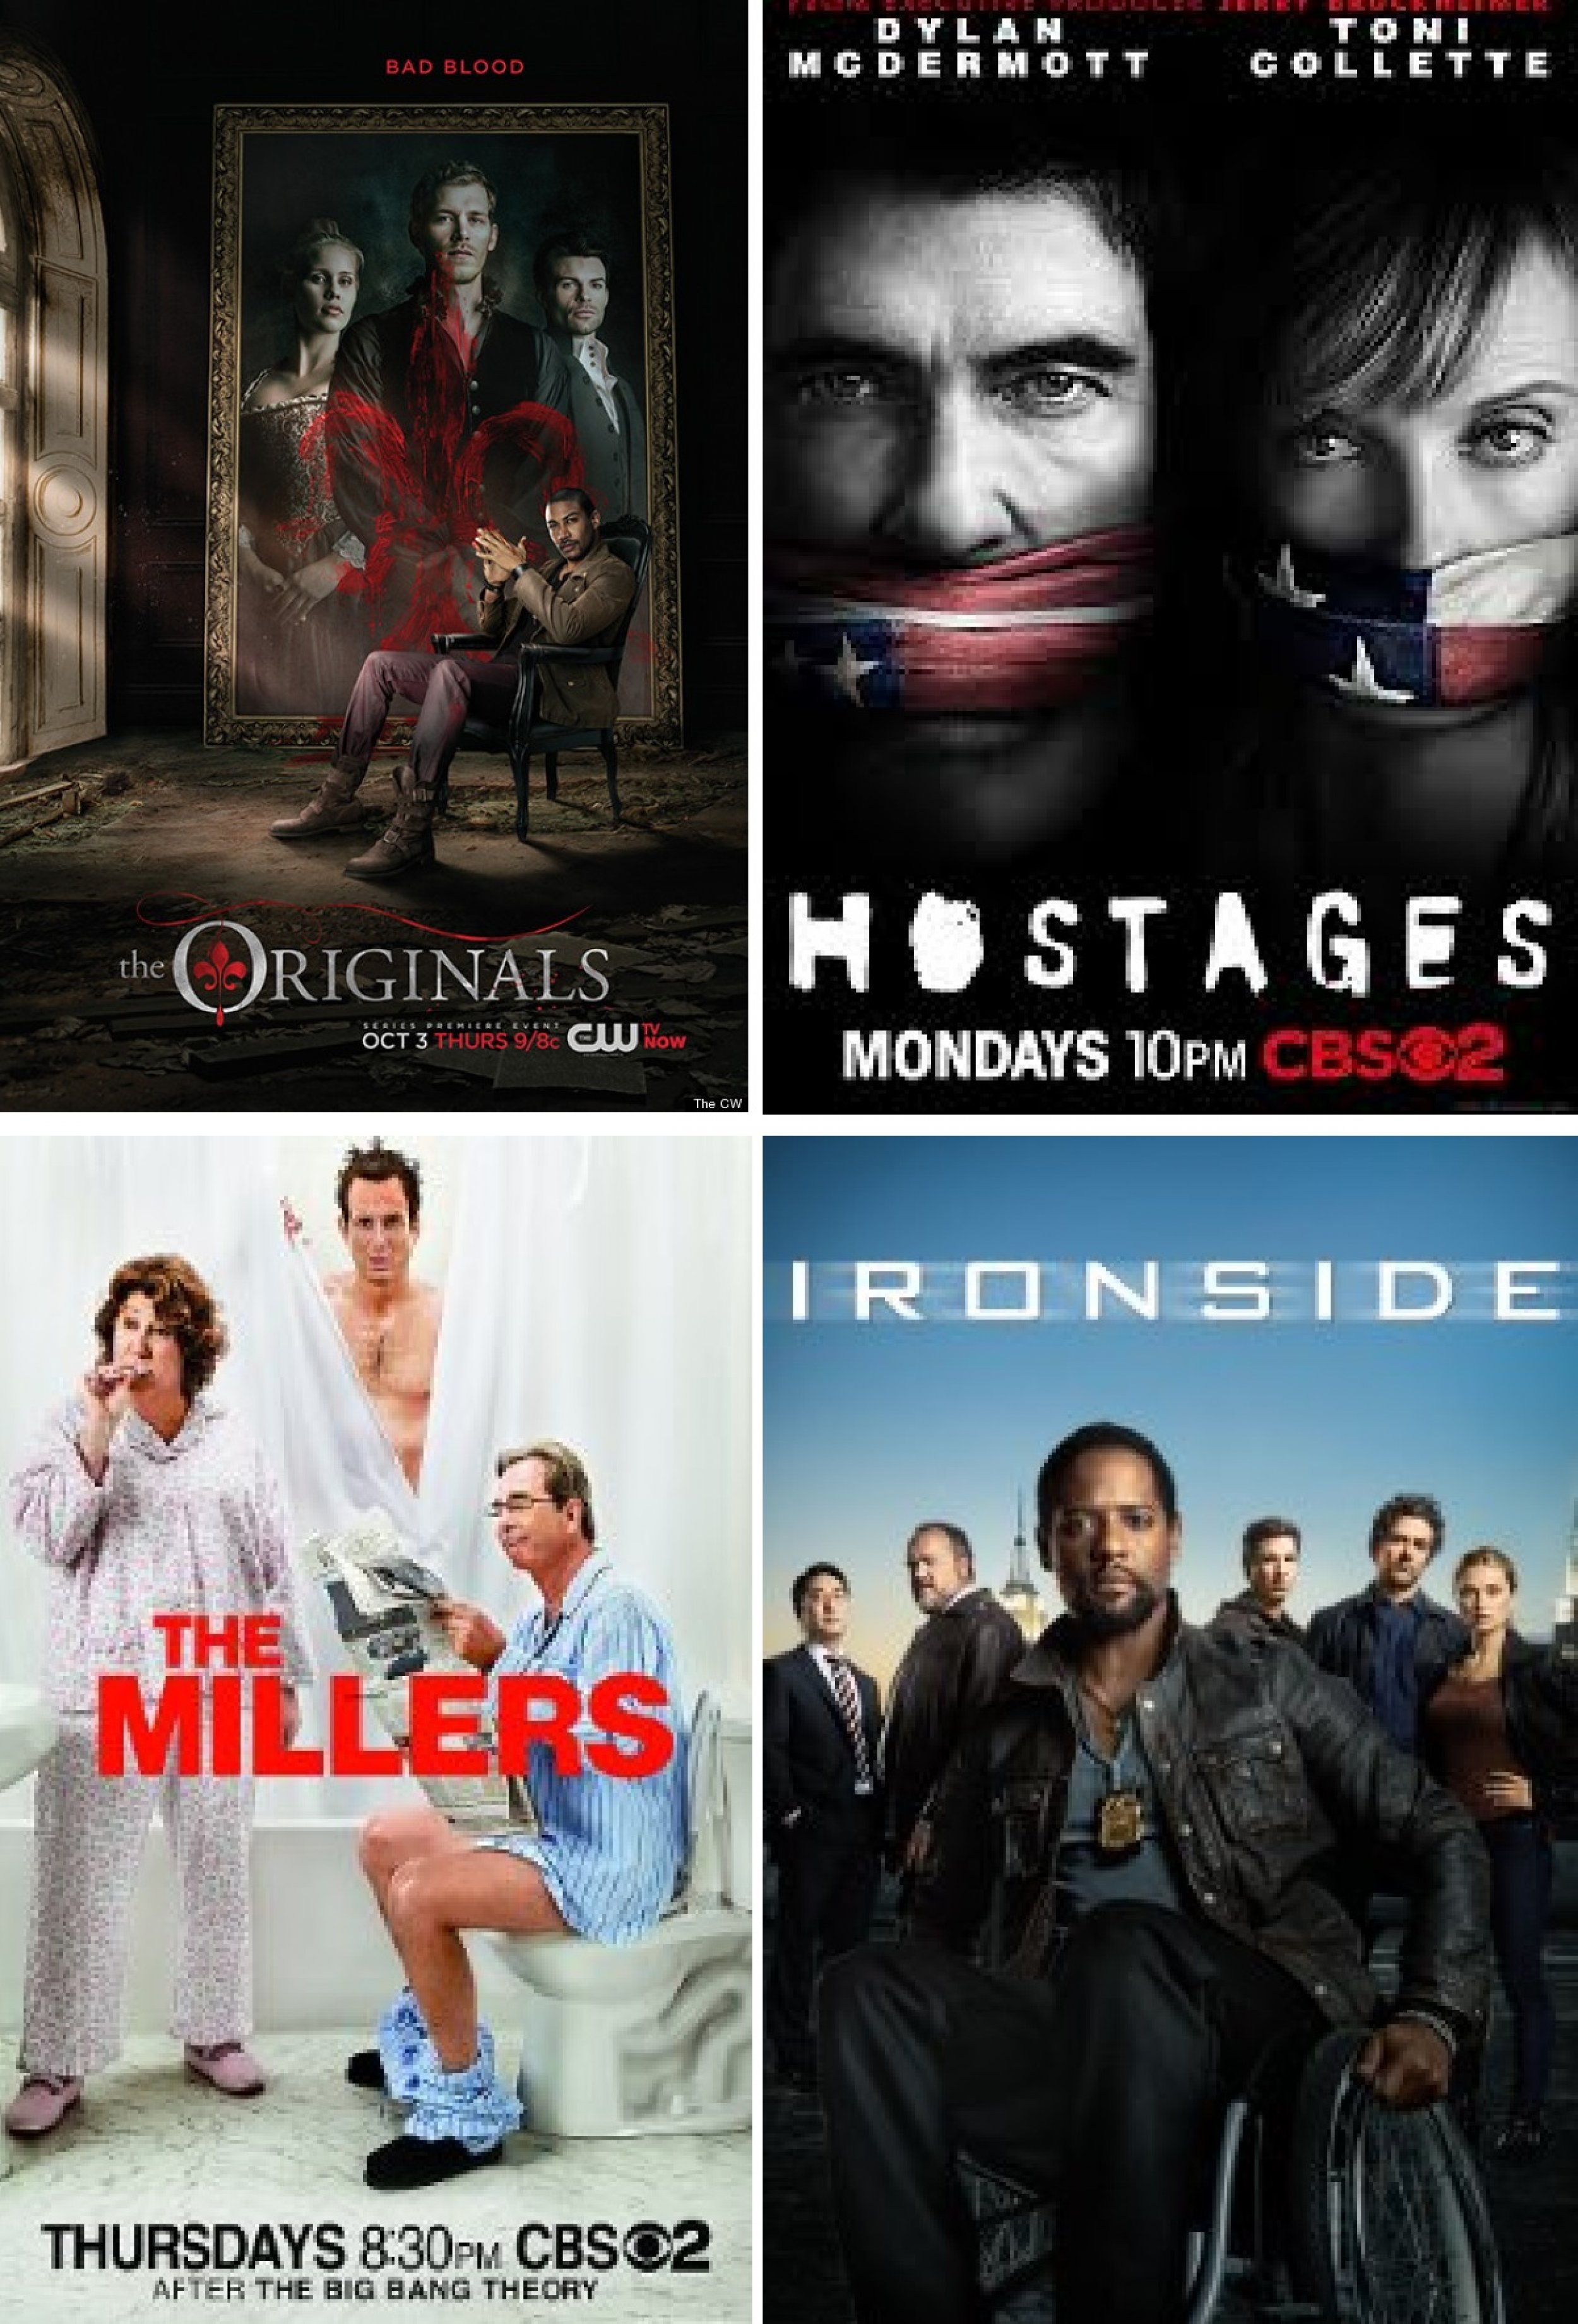 Fall TV Shows 2013 Renewal And Cancellation Update; What New Shows